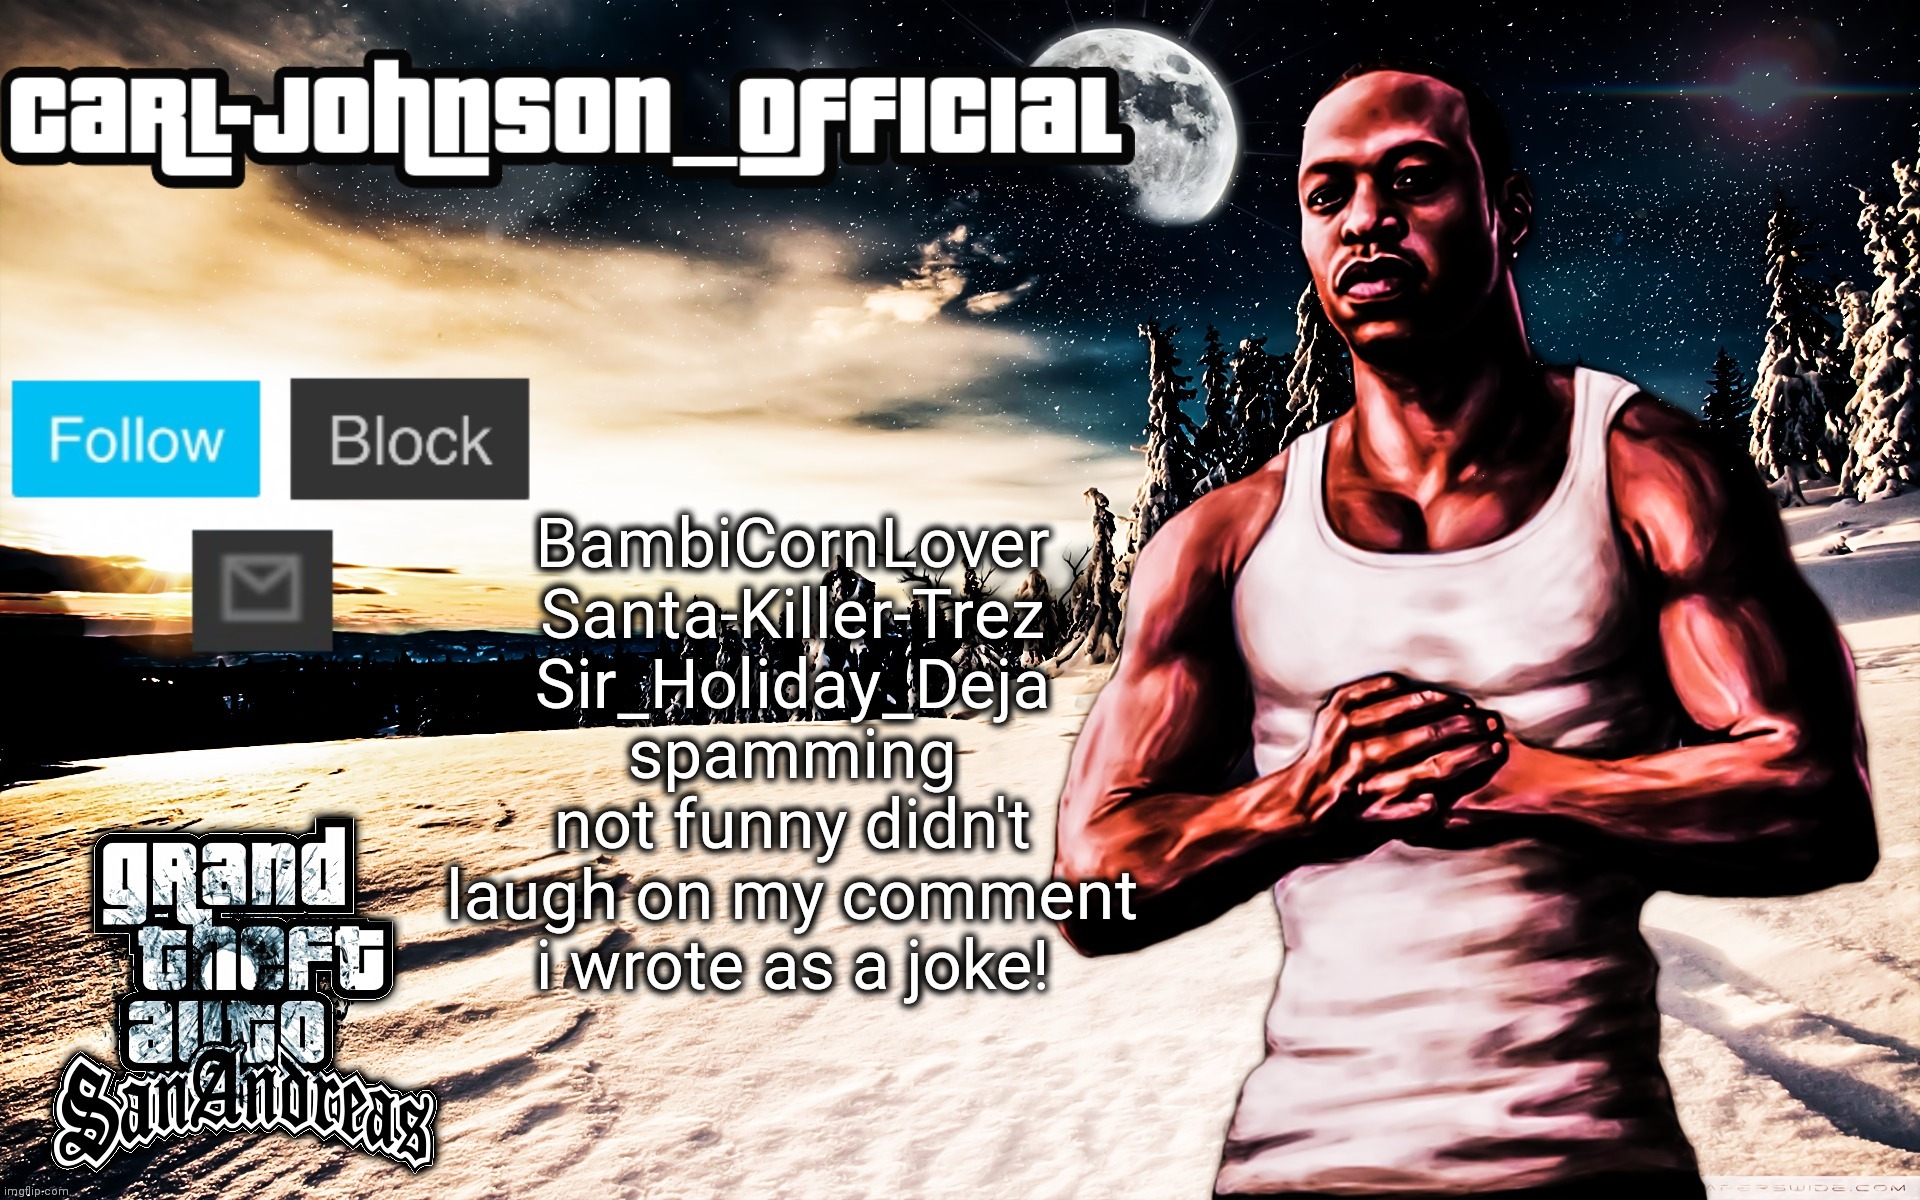 I get a lot of notifications | BambiCornLover Santa-Killer-Trez Sir_Holiday_Deja spamming not funny didn't laugh on my comment i wrote as a joke! | image tagged in carl-johnson_official template | made w/ Imgflip meme maker